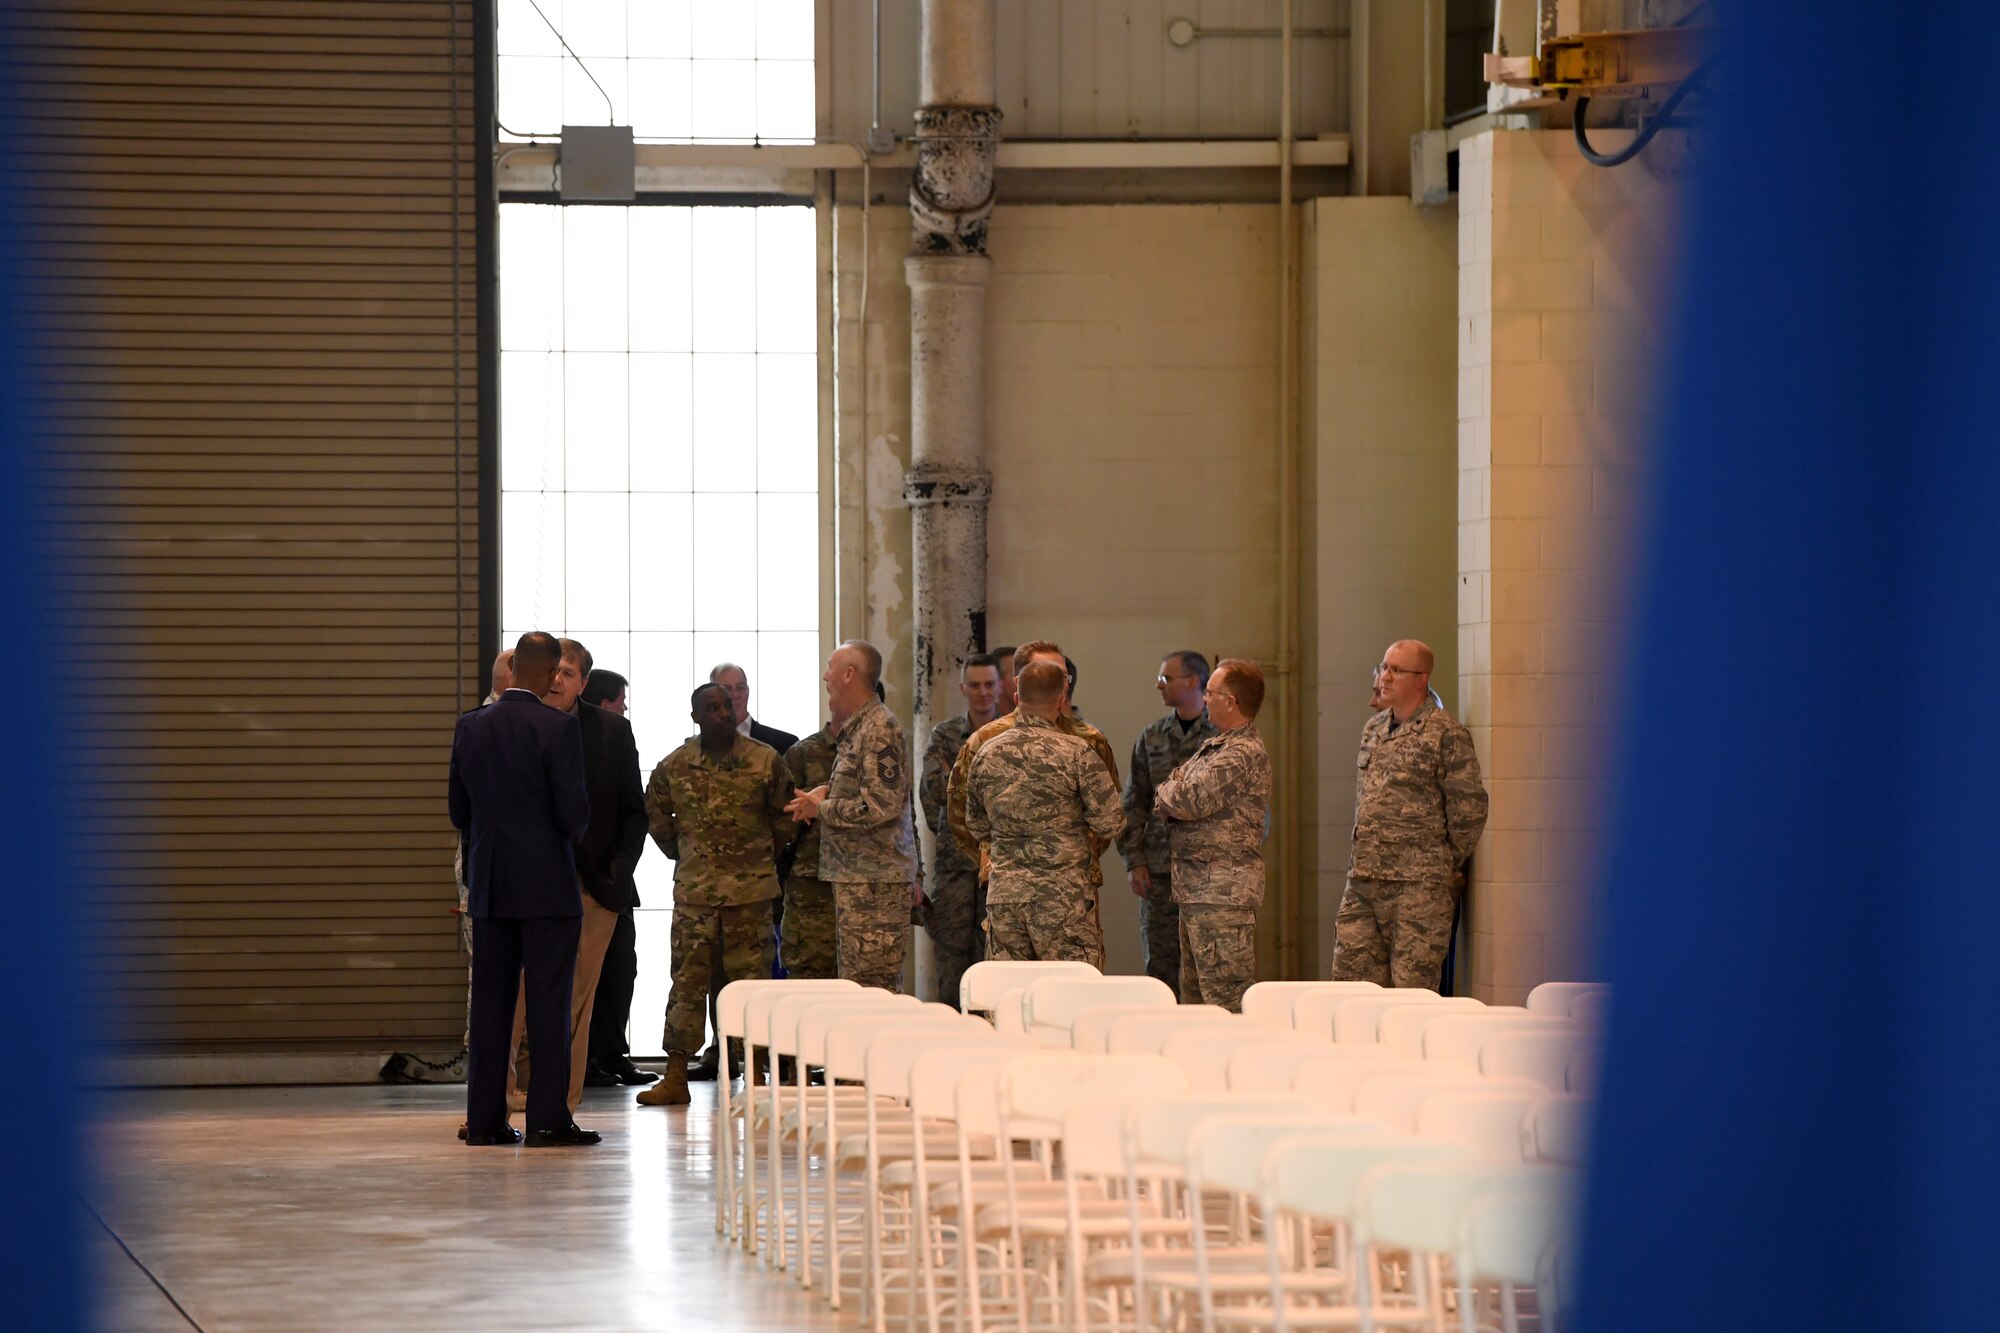 U.S. Air Force Brig. Gen. Clarence Ervin talks to friends and fellow airmen prior to his retirement ceremony at the North Carolina Air National Guard Base (NCANG), Charlotte Douglas International Airport, Feb. 09, 2019. Family, friends and guard members gathered to celebrate the retirement of Gen. Ervin, Chief of Staff for the NCANG, after serving in the military for 37 years.